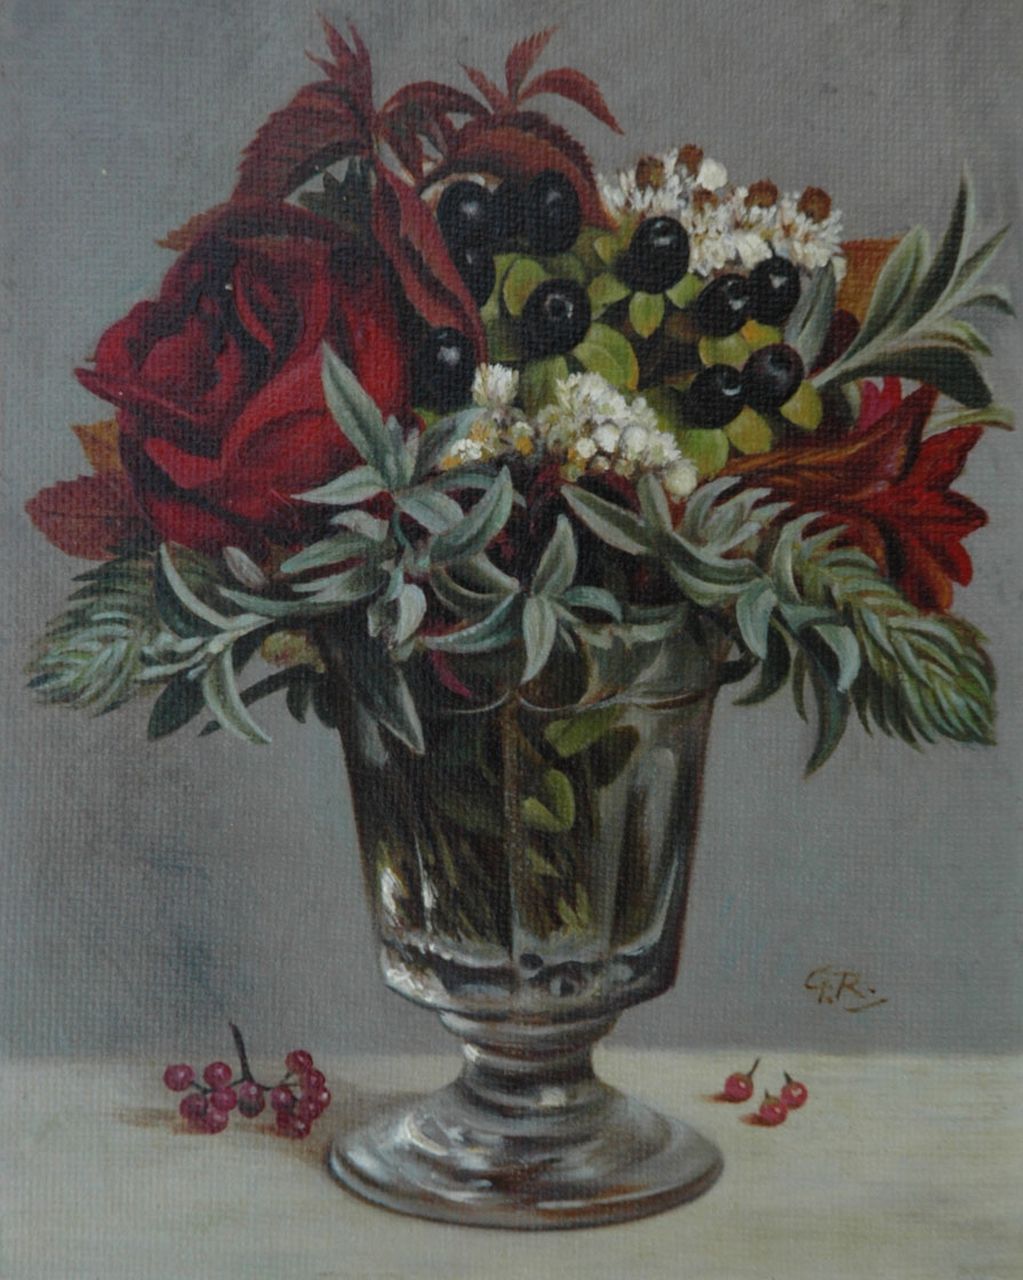 Röling G.V.A.  | Gerard Victor Alphons 'Gé' Röling, A flower still life in a glass vase, Öl auf Holz 19,0 x 15,1 cm, signed l.r. with initials and in full on the reverse